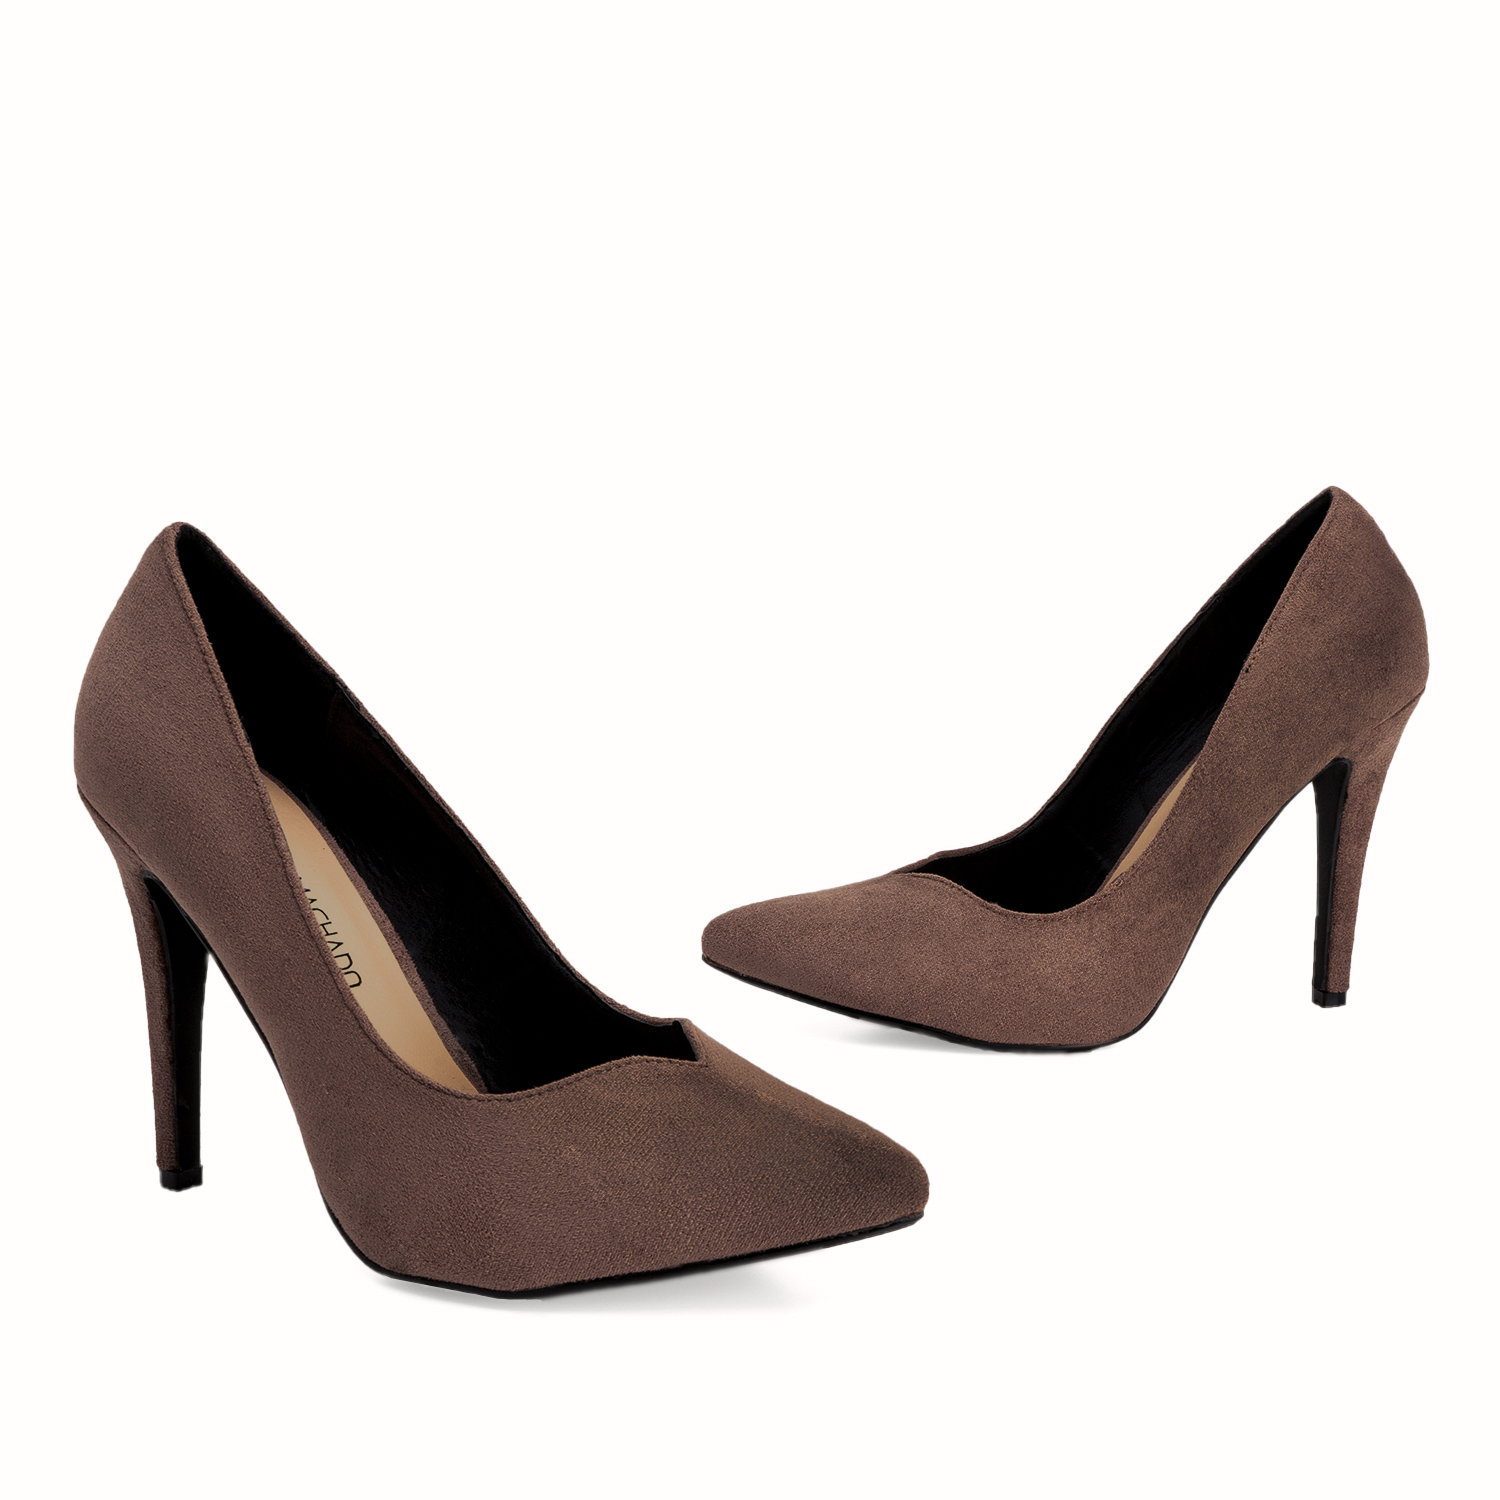 Heeled shoes in light brown faux suede 